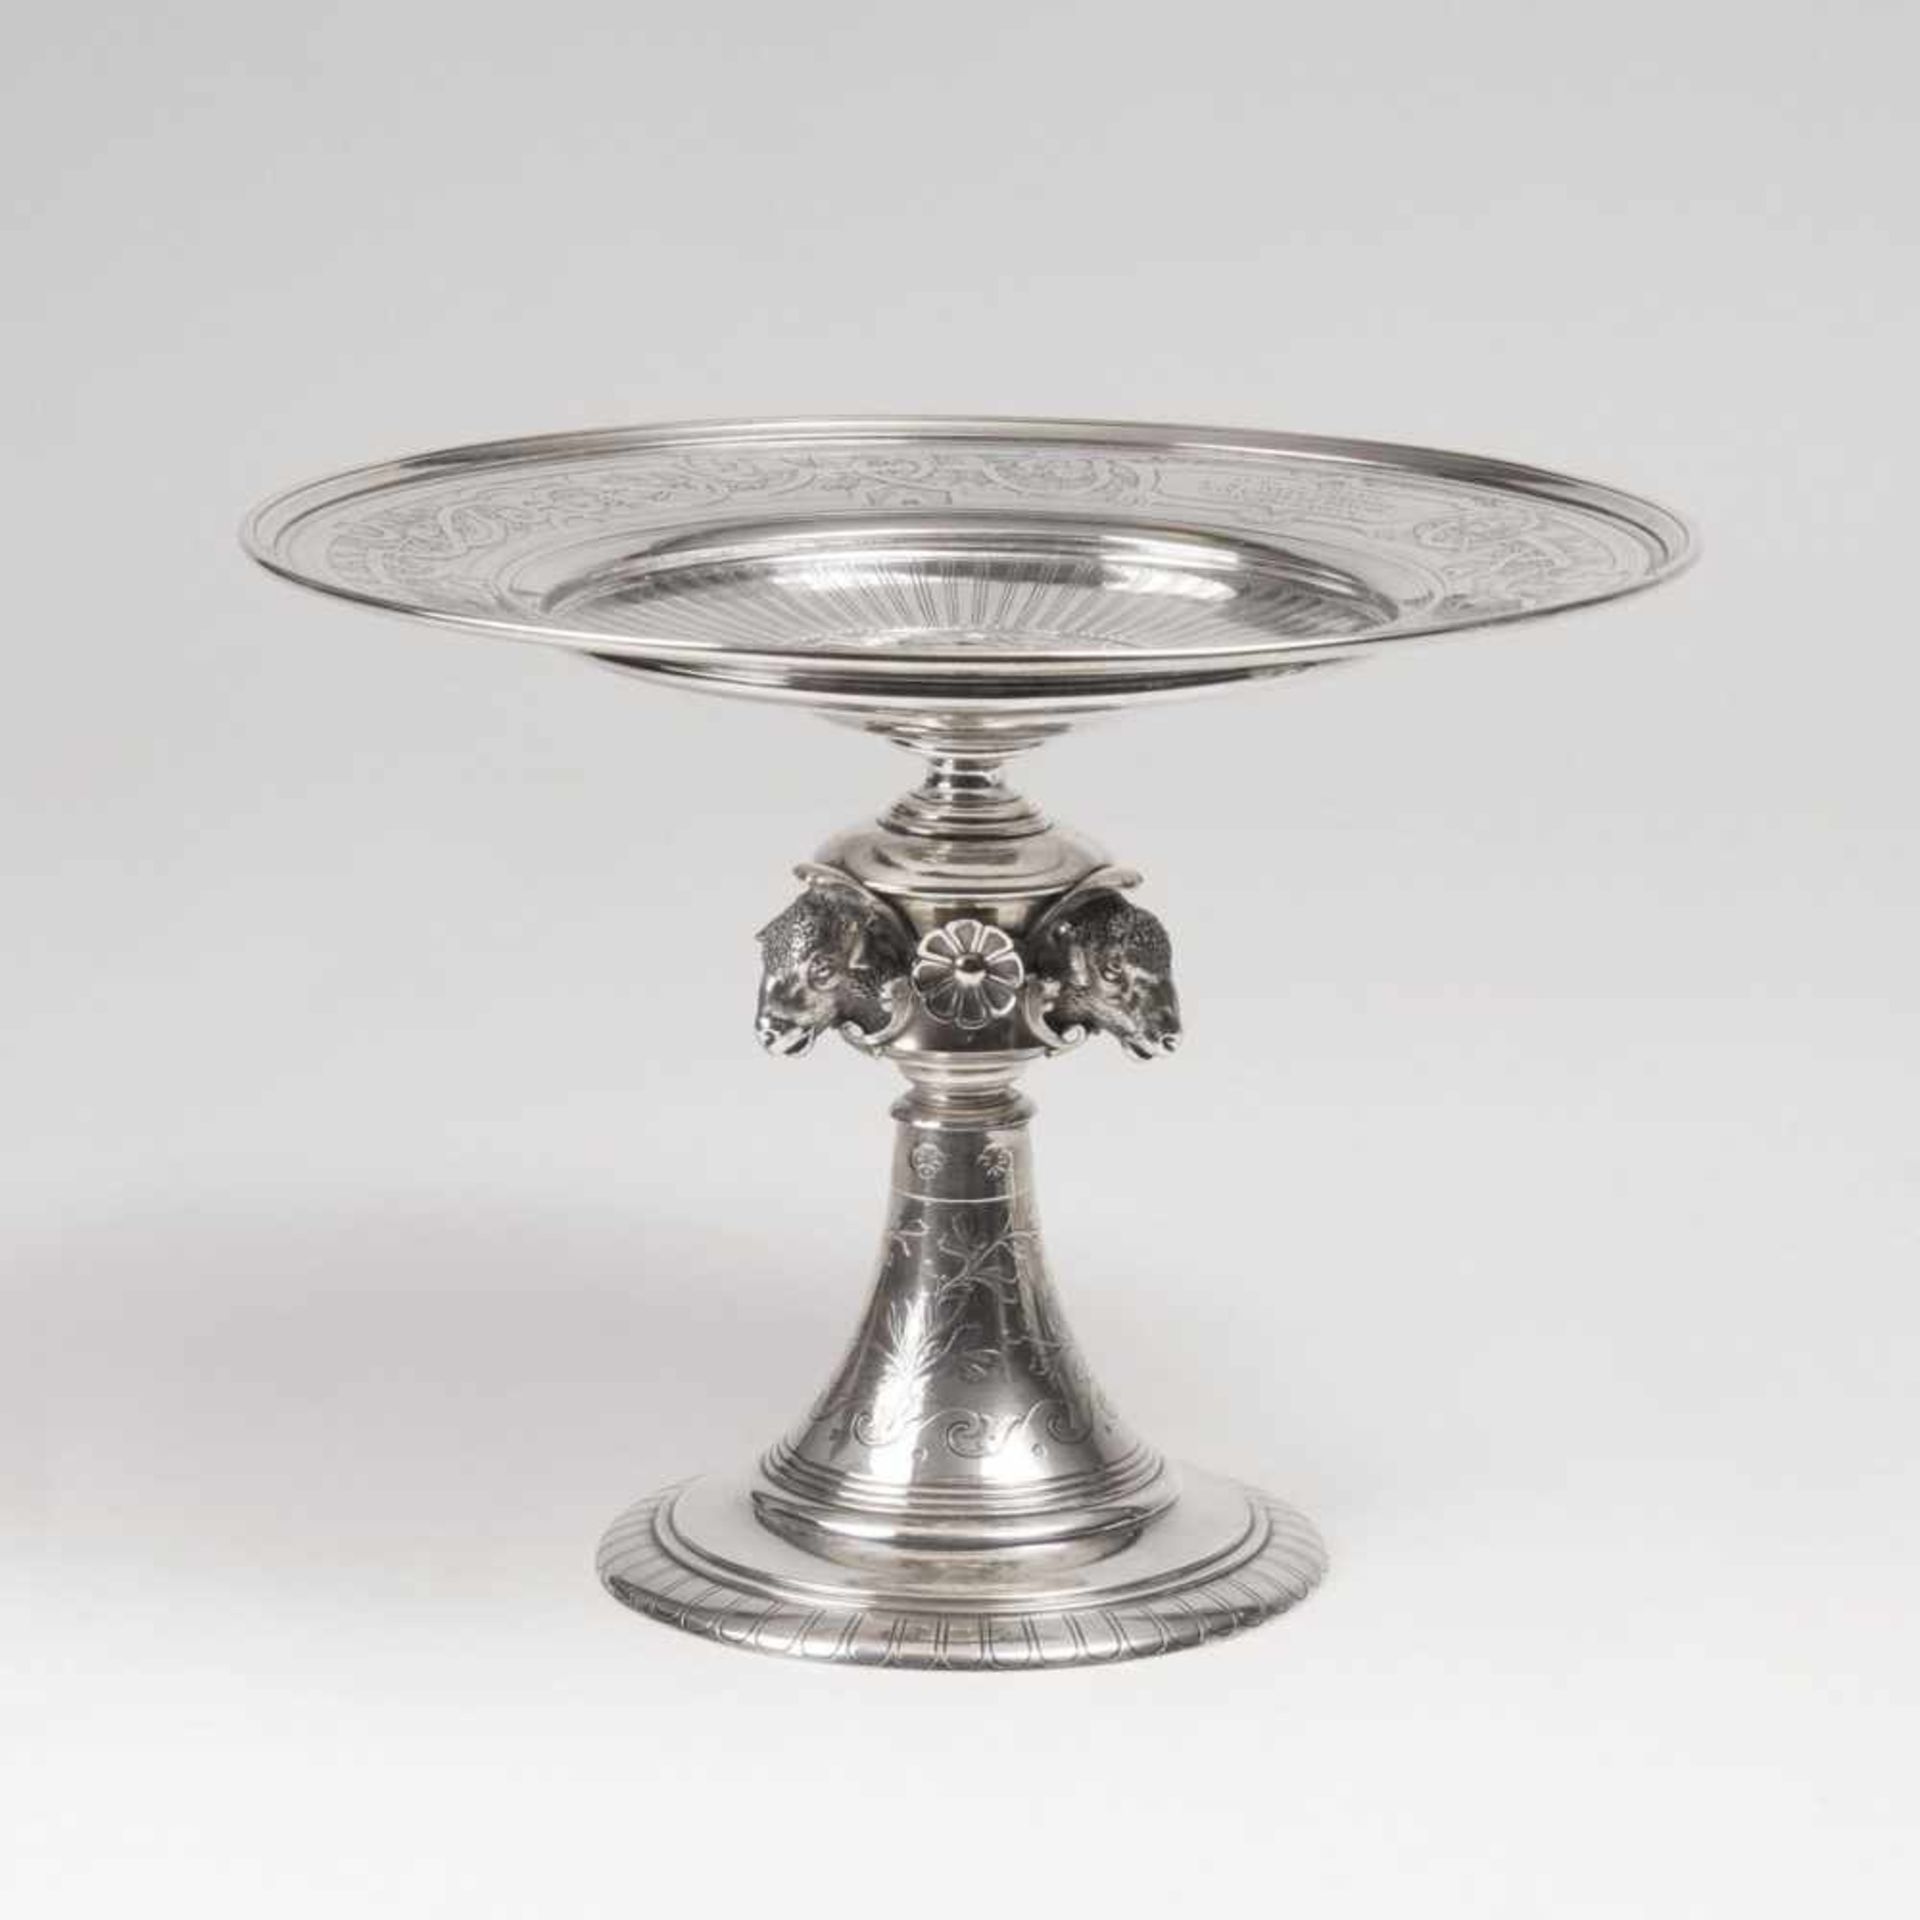 Christofle & Cieest. 1830 in ParisA French CentrepieceParis, mid 19th cent. Silver, marked.